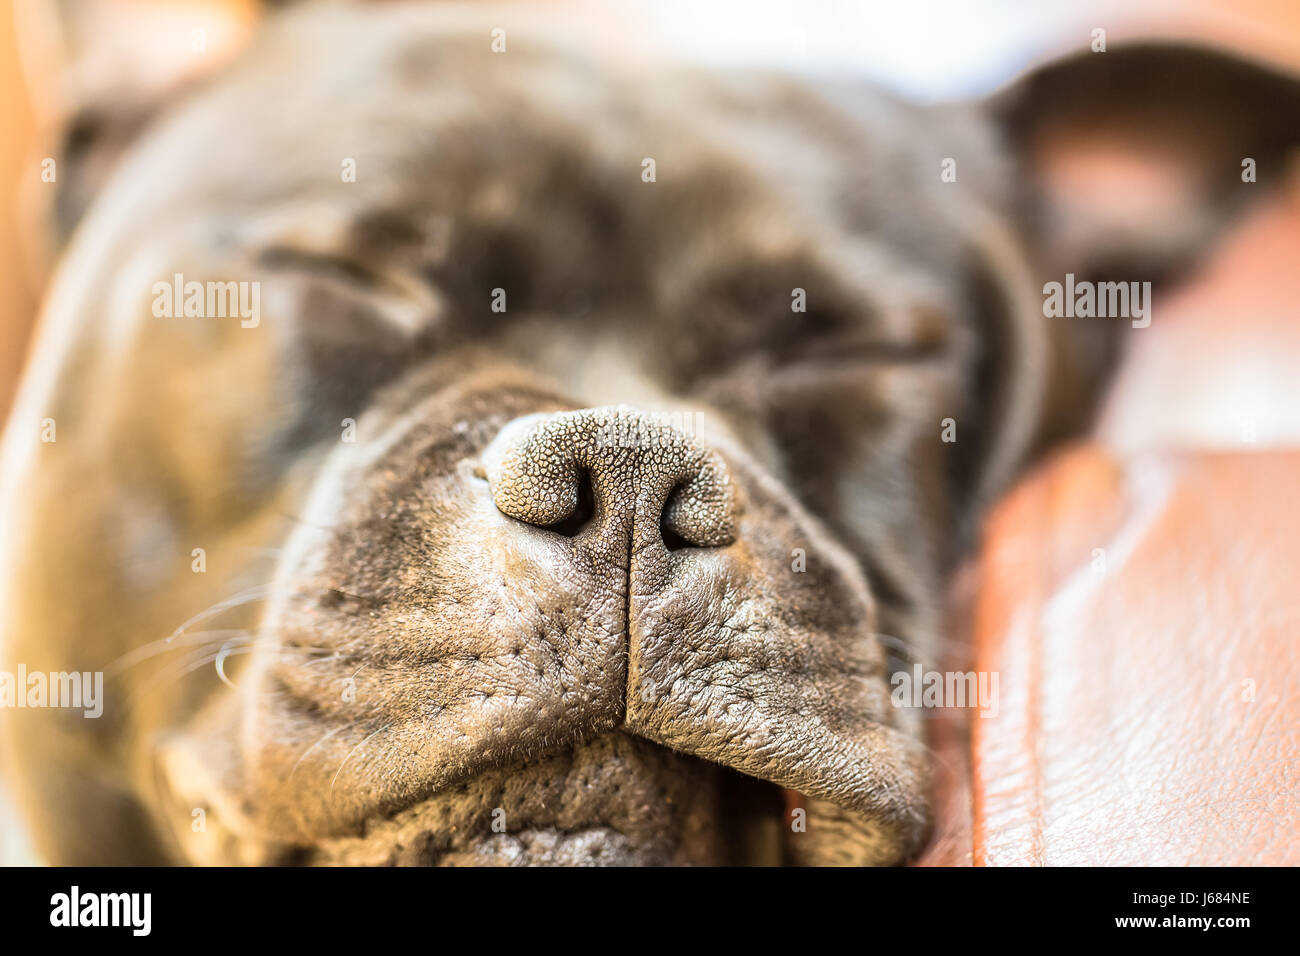 close up of the nose mussle of a sleeping black staffordshire bull terrier dog on a leather sofa. His fur is soft, smooth and glossy. Stock Photo